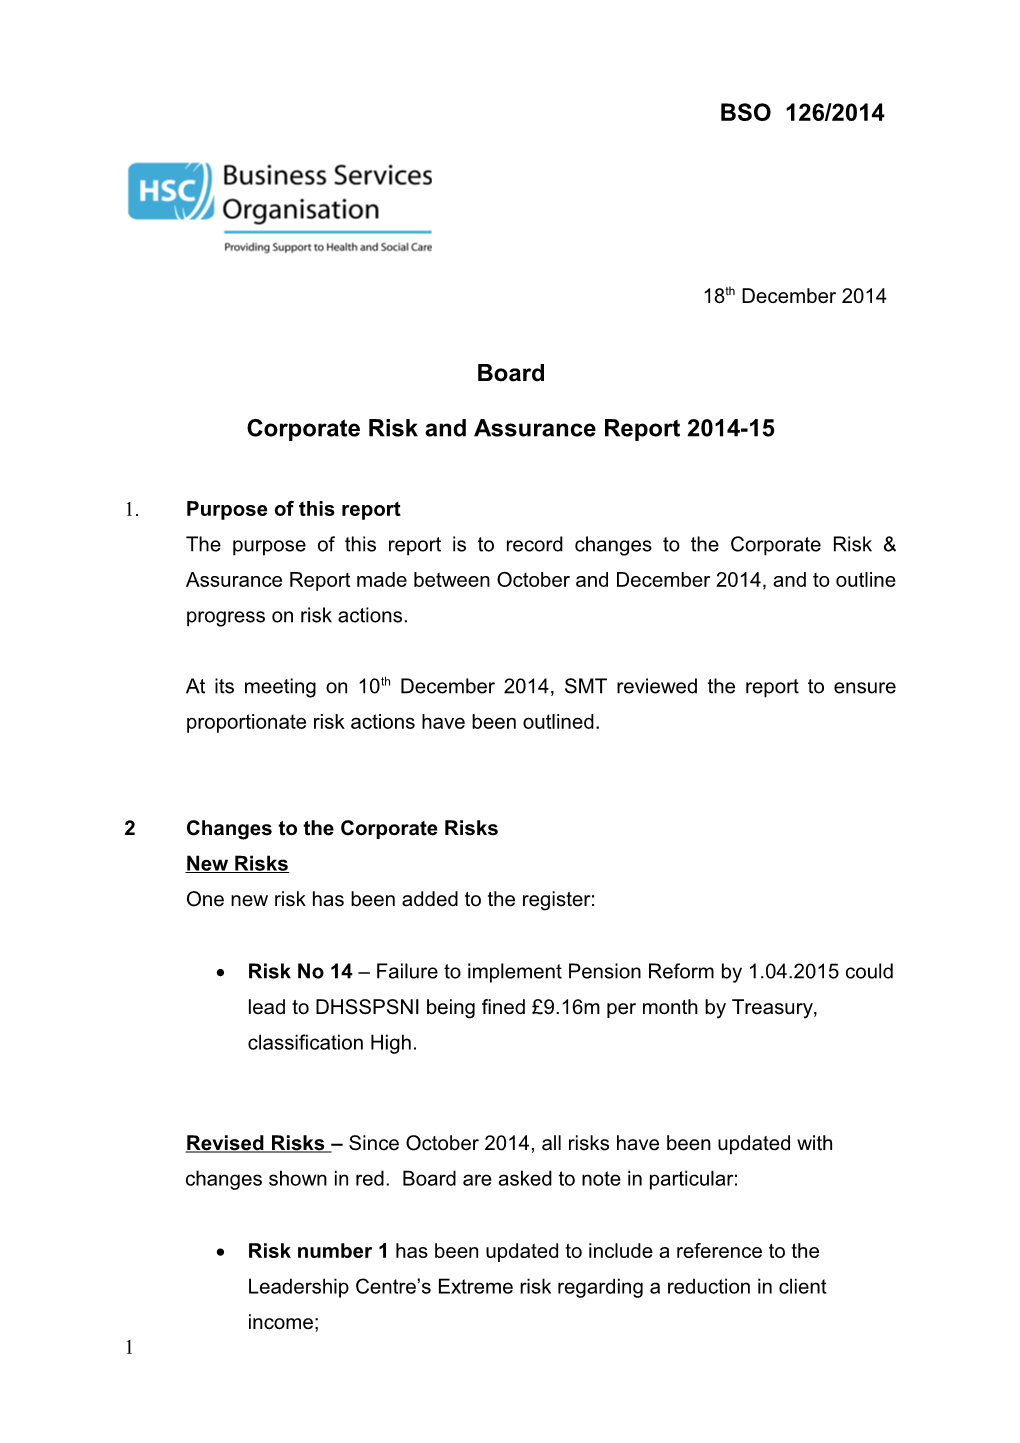 Corporate Risk and Assurance Report 2014-15